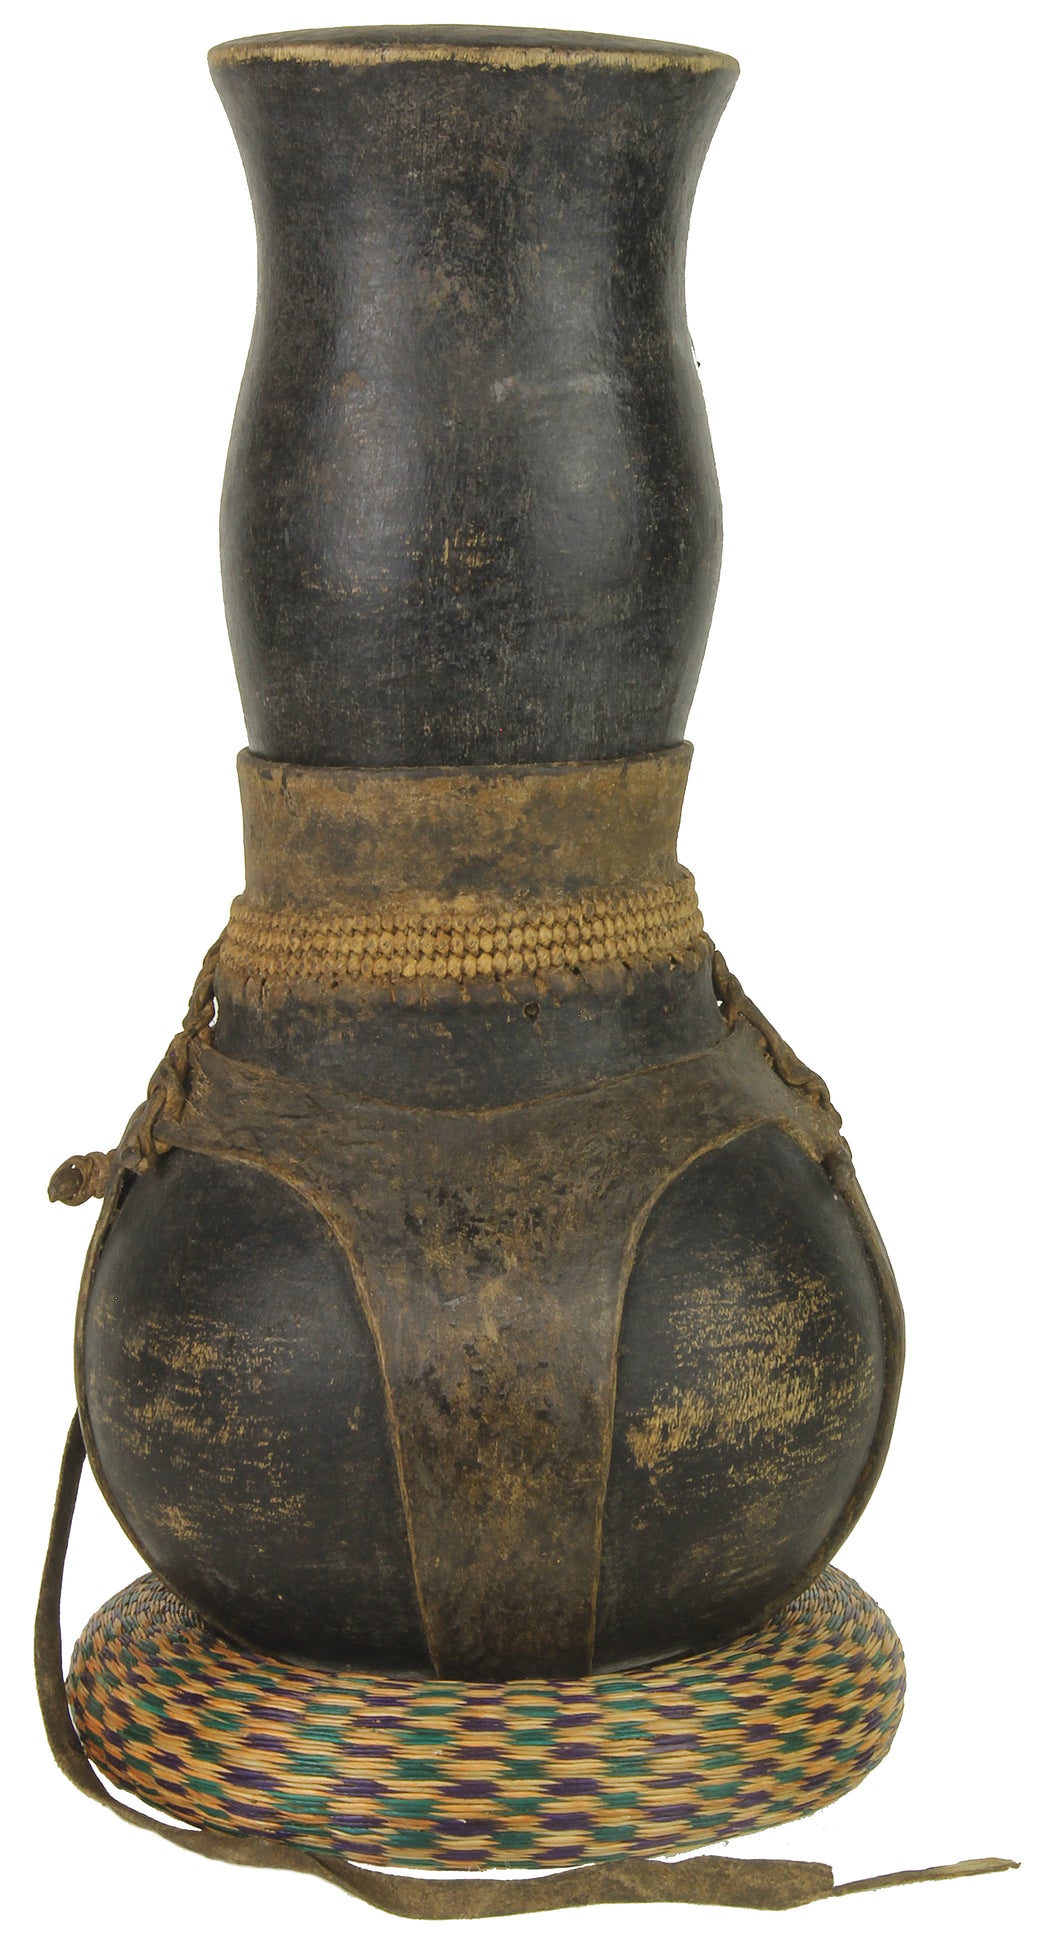 Vintage Wooden & Leather Milk Vessel from Congo, Africa | 11" - Niger Bend